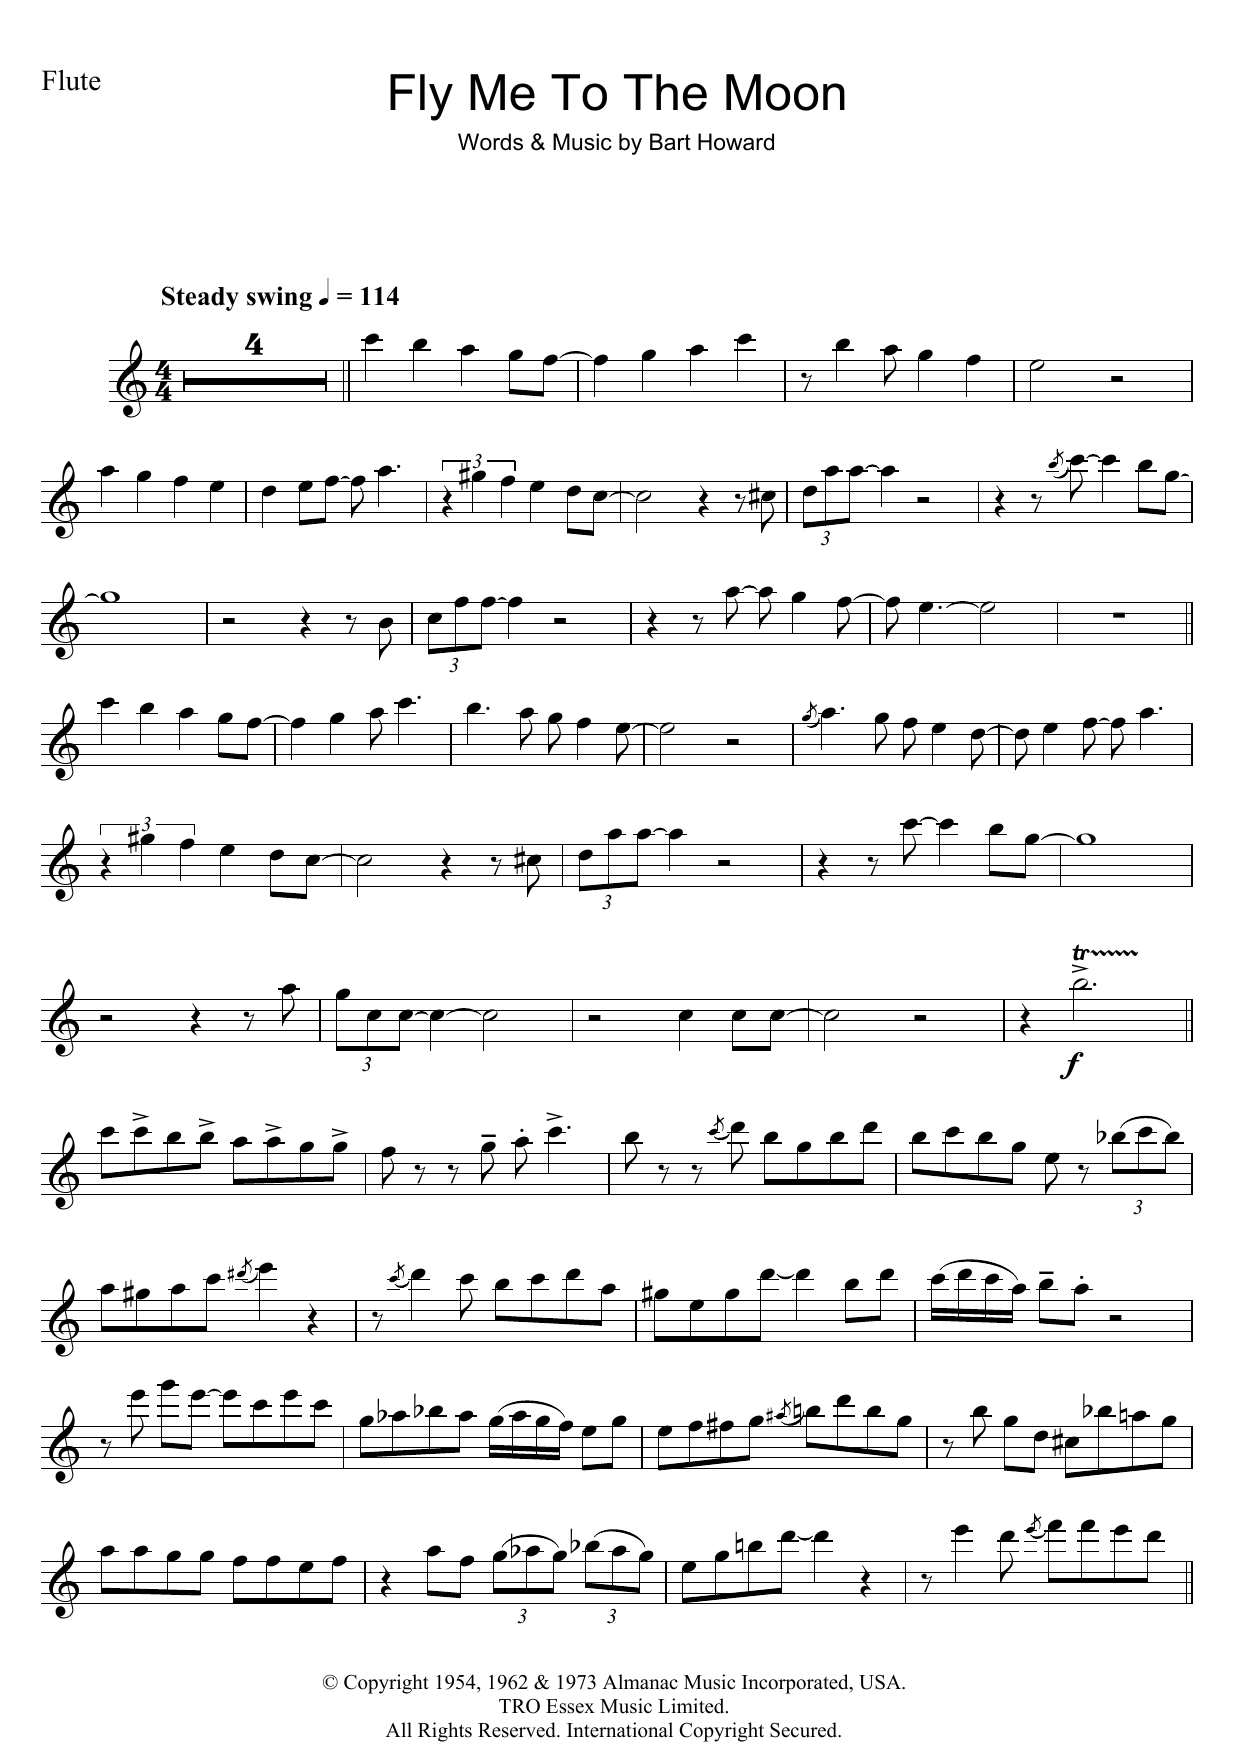 Download Julie London Fly Me To The Moon (In Other Words) Sheet Music